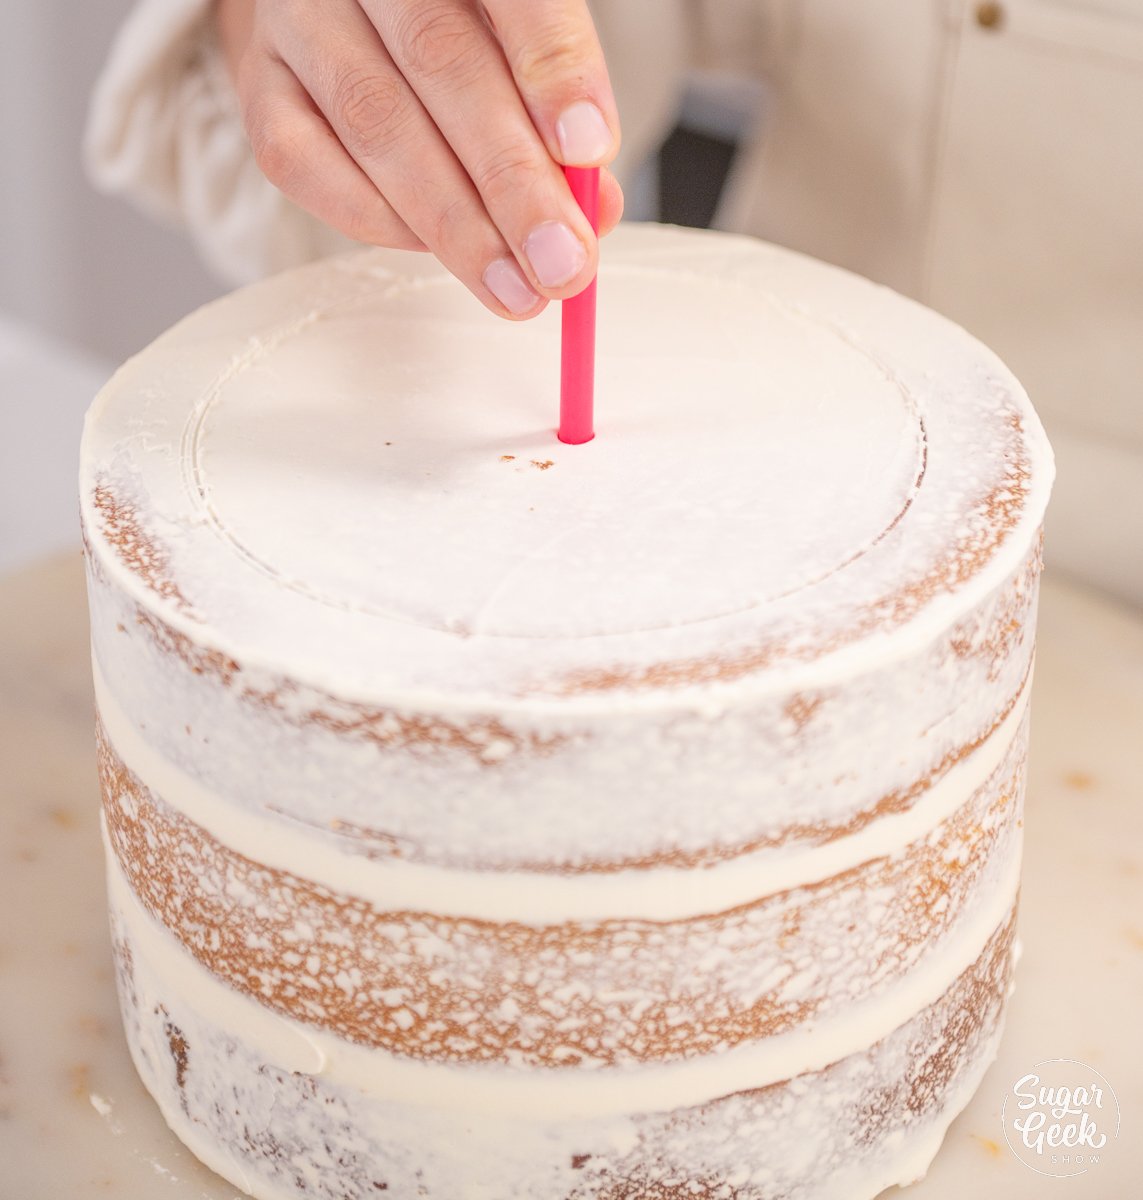 inserting a straw into the center of the top of a cake